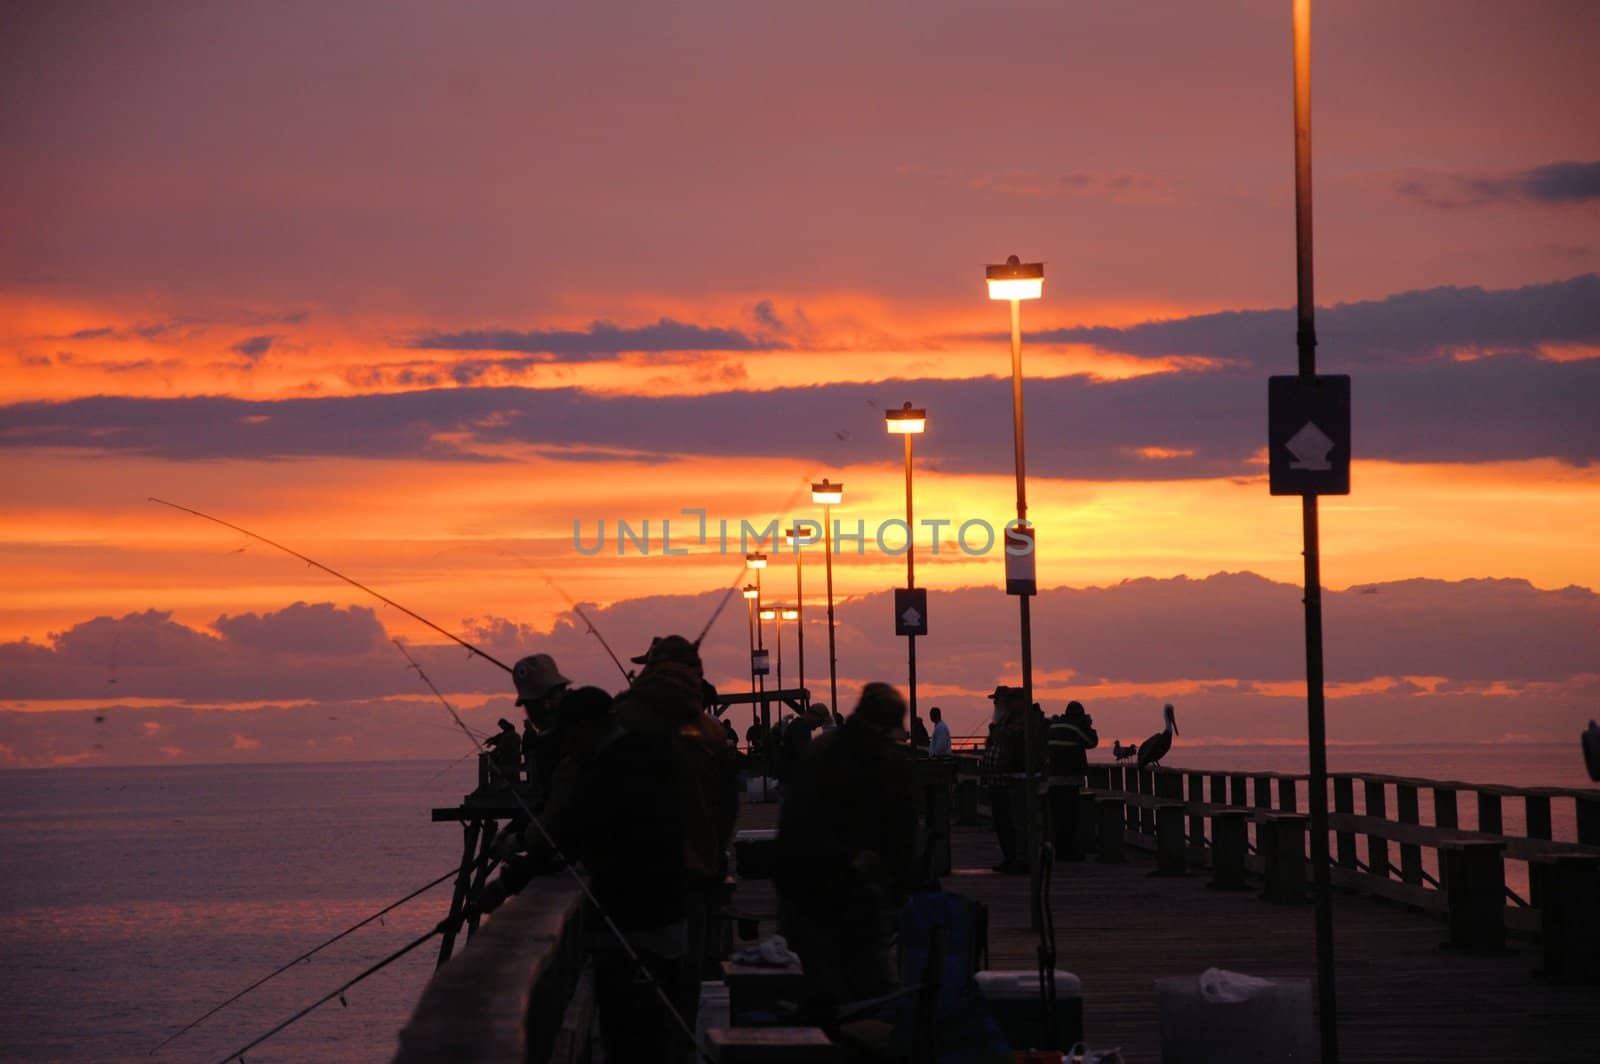 The sunrise over the pier at Kure Beach  with fisherman on the pier.